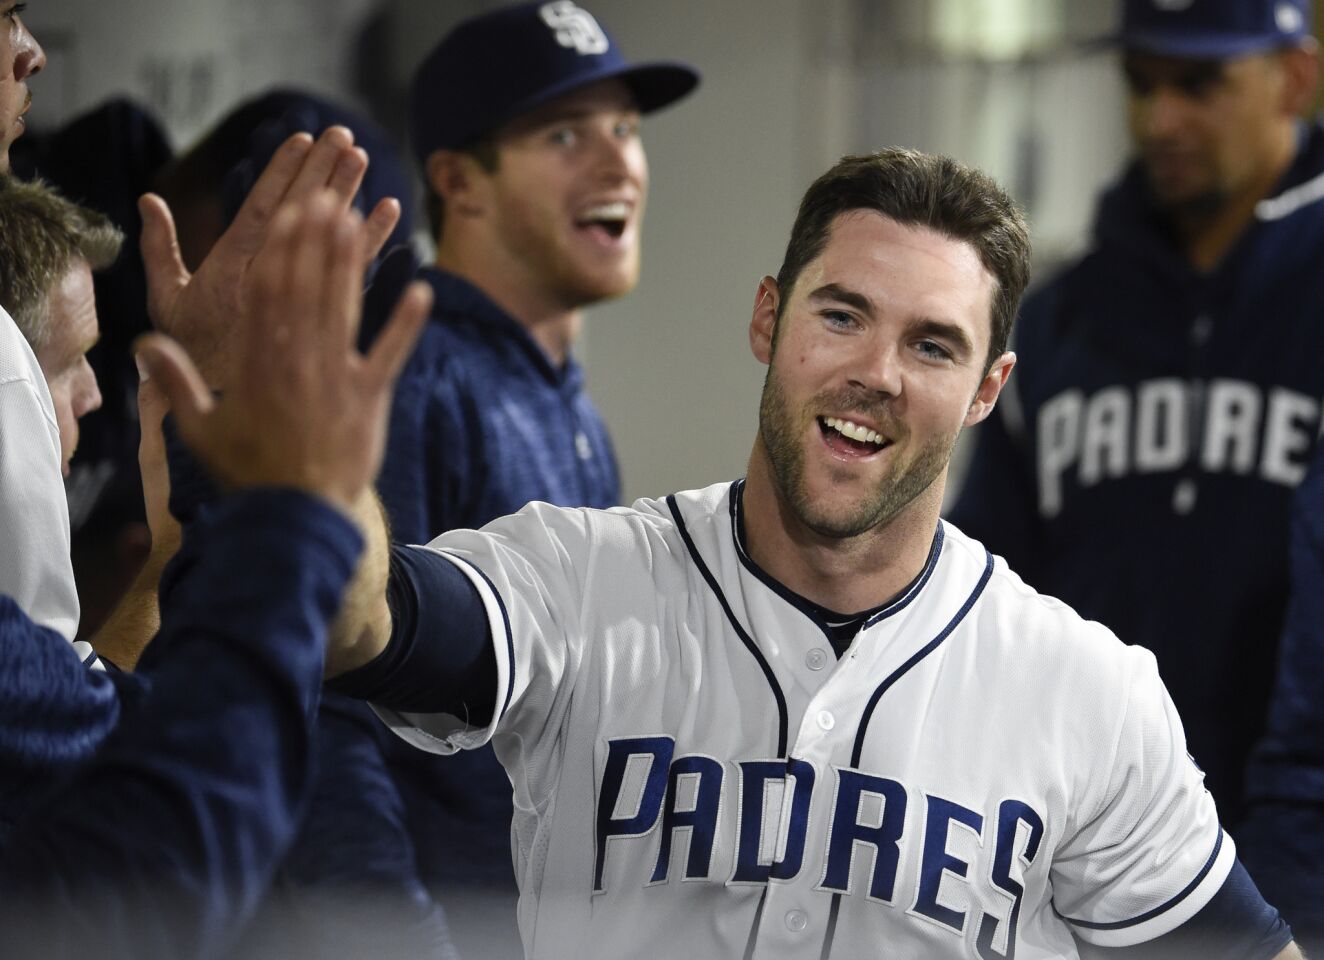 Szczur, out of Villanova, was the 159th pick in the 2010 draft. He made his big-league debut in 2014. After the Cubs cut him in 2017, he signed with the Padres, for whom he still plays.